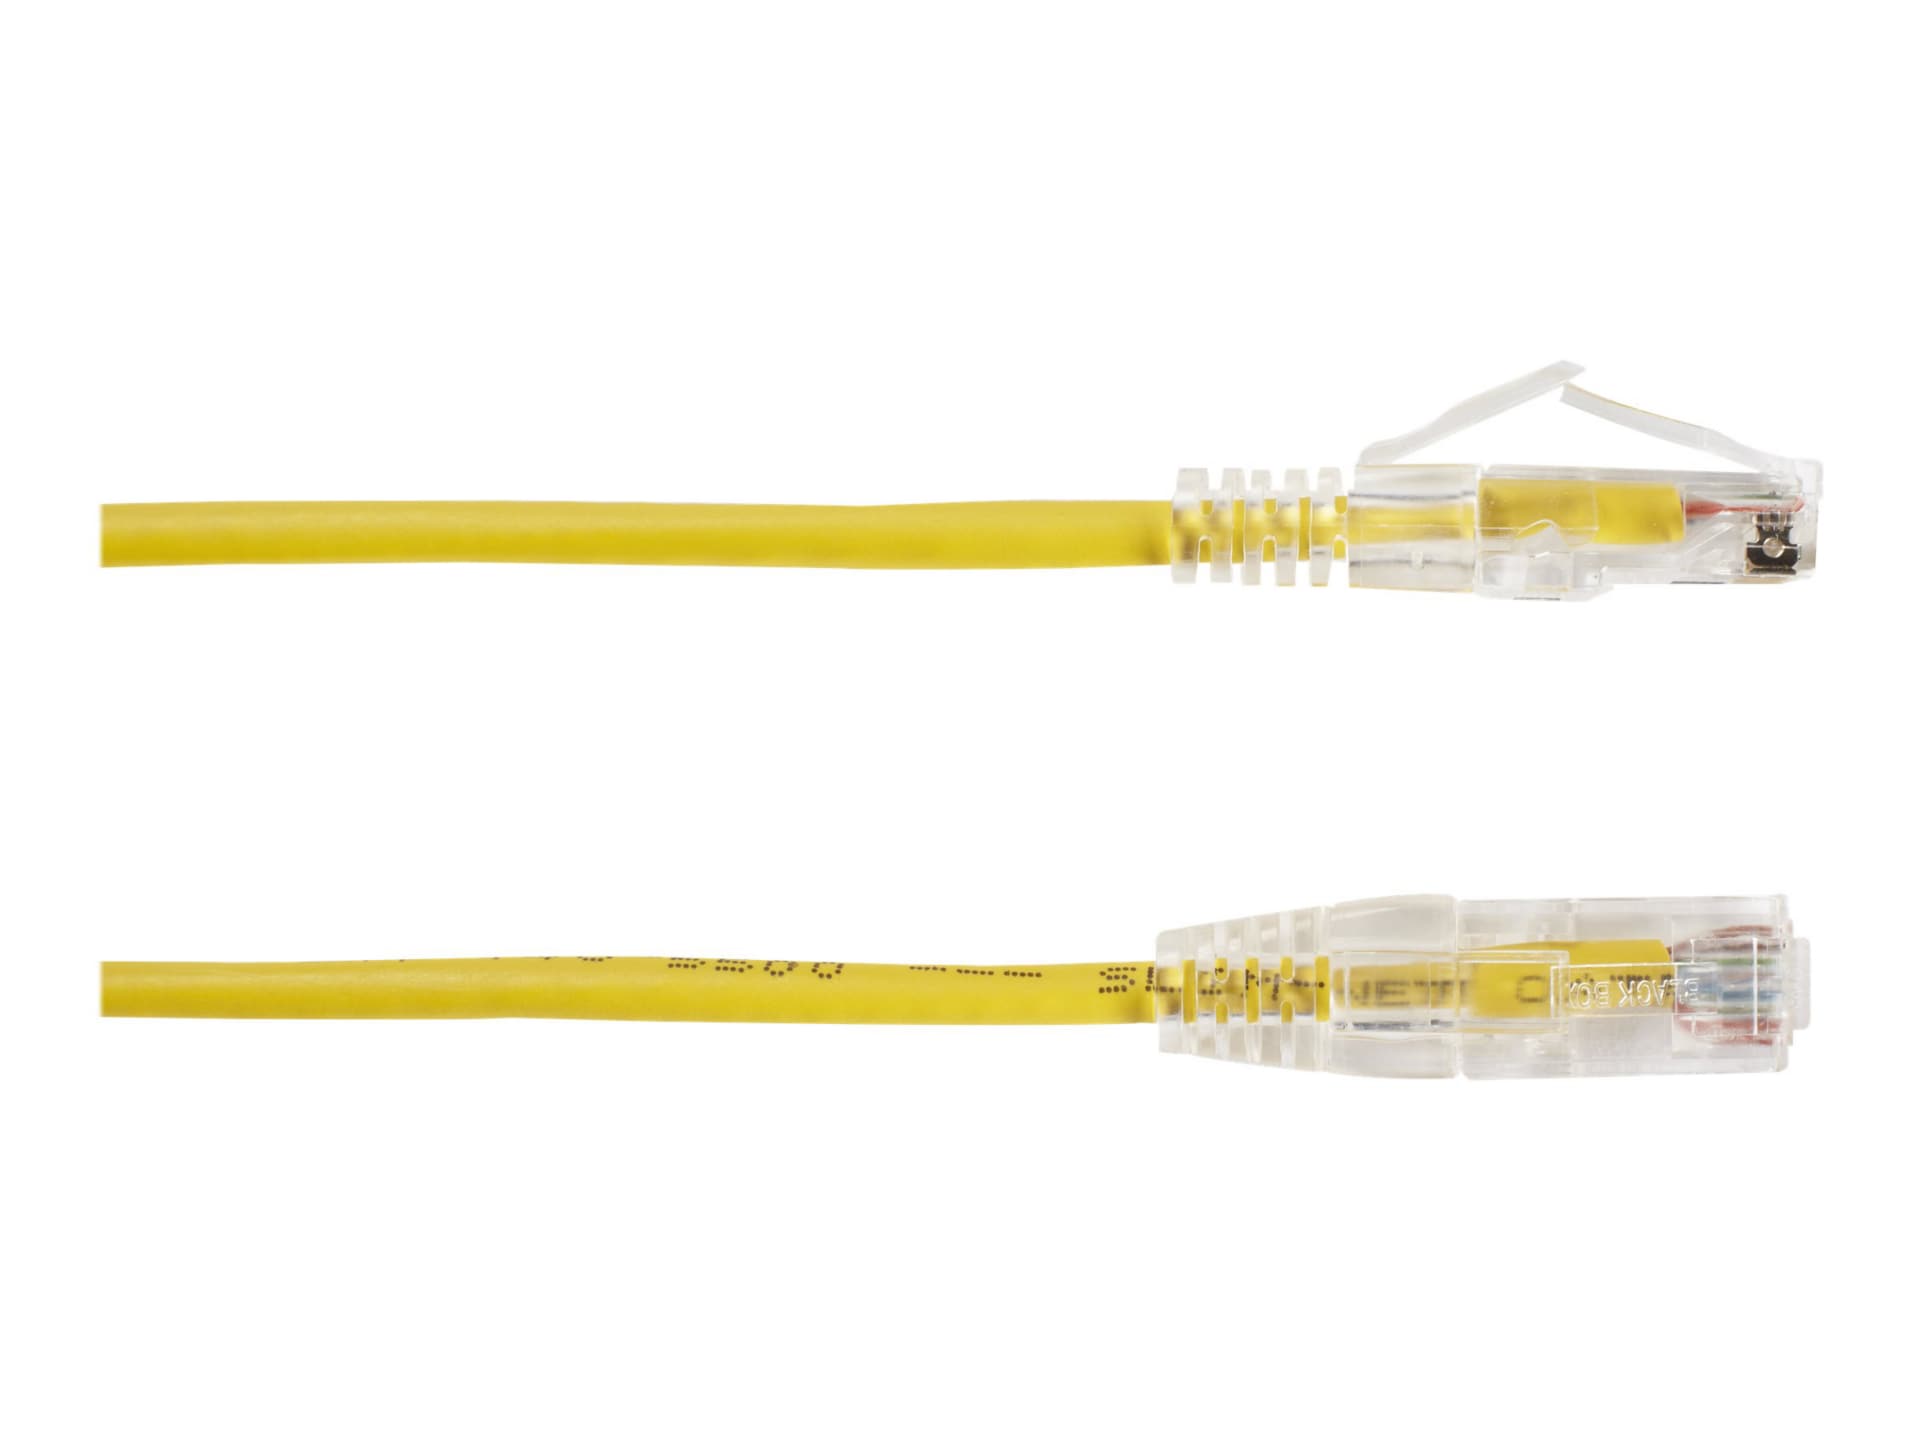 Black Box Slim-Net patch cable - 2 ft - yellow